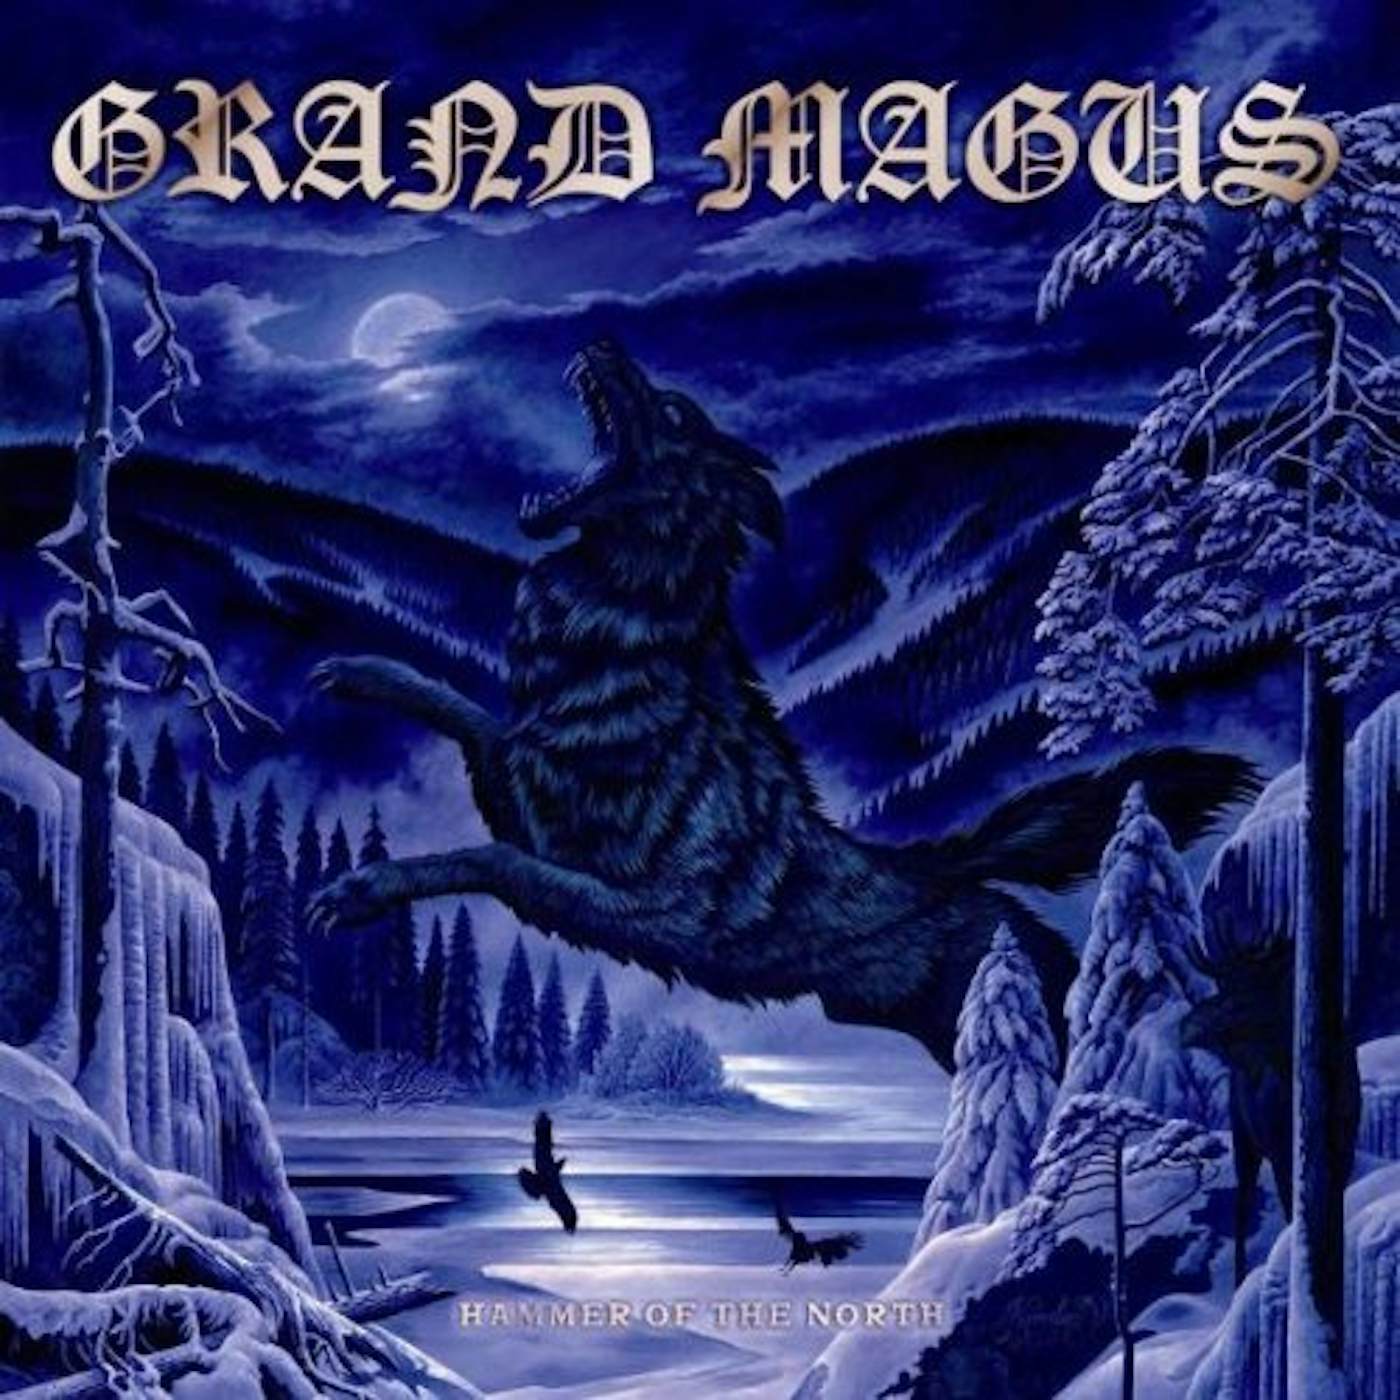 Grand Magus HAMMER OF THE NORTH Vinyl Record - 180 Gram Pressing